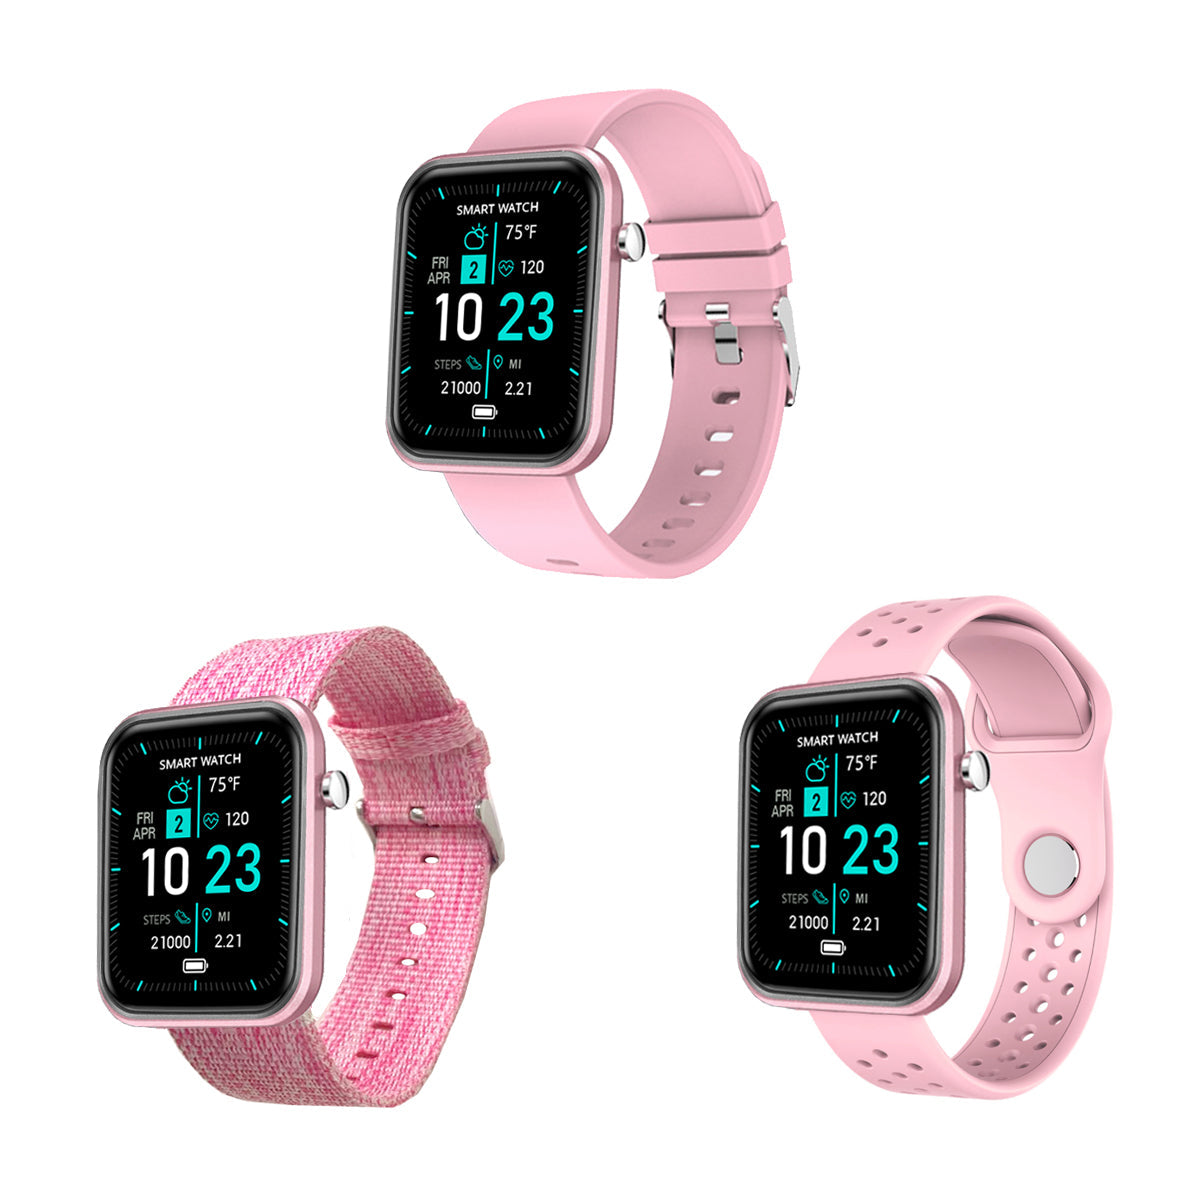 Advanced Smartwatch With Three Bands And Wellness + Activity Tracker Vista Shops